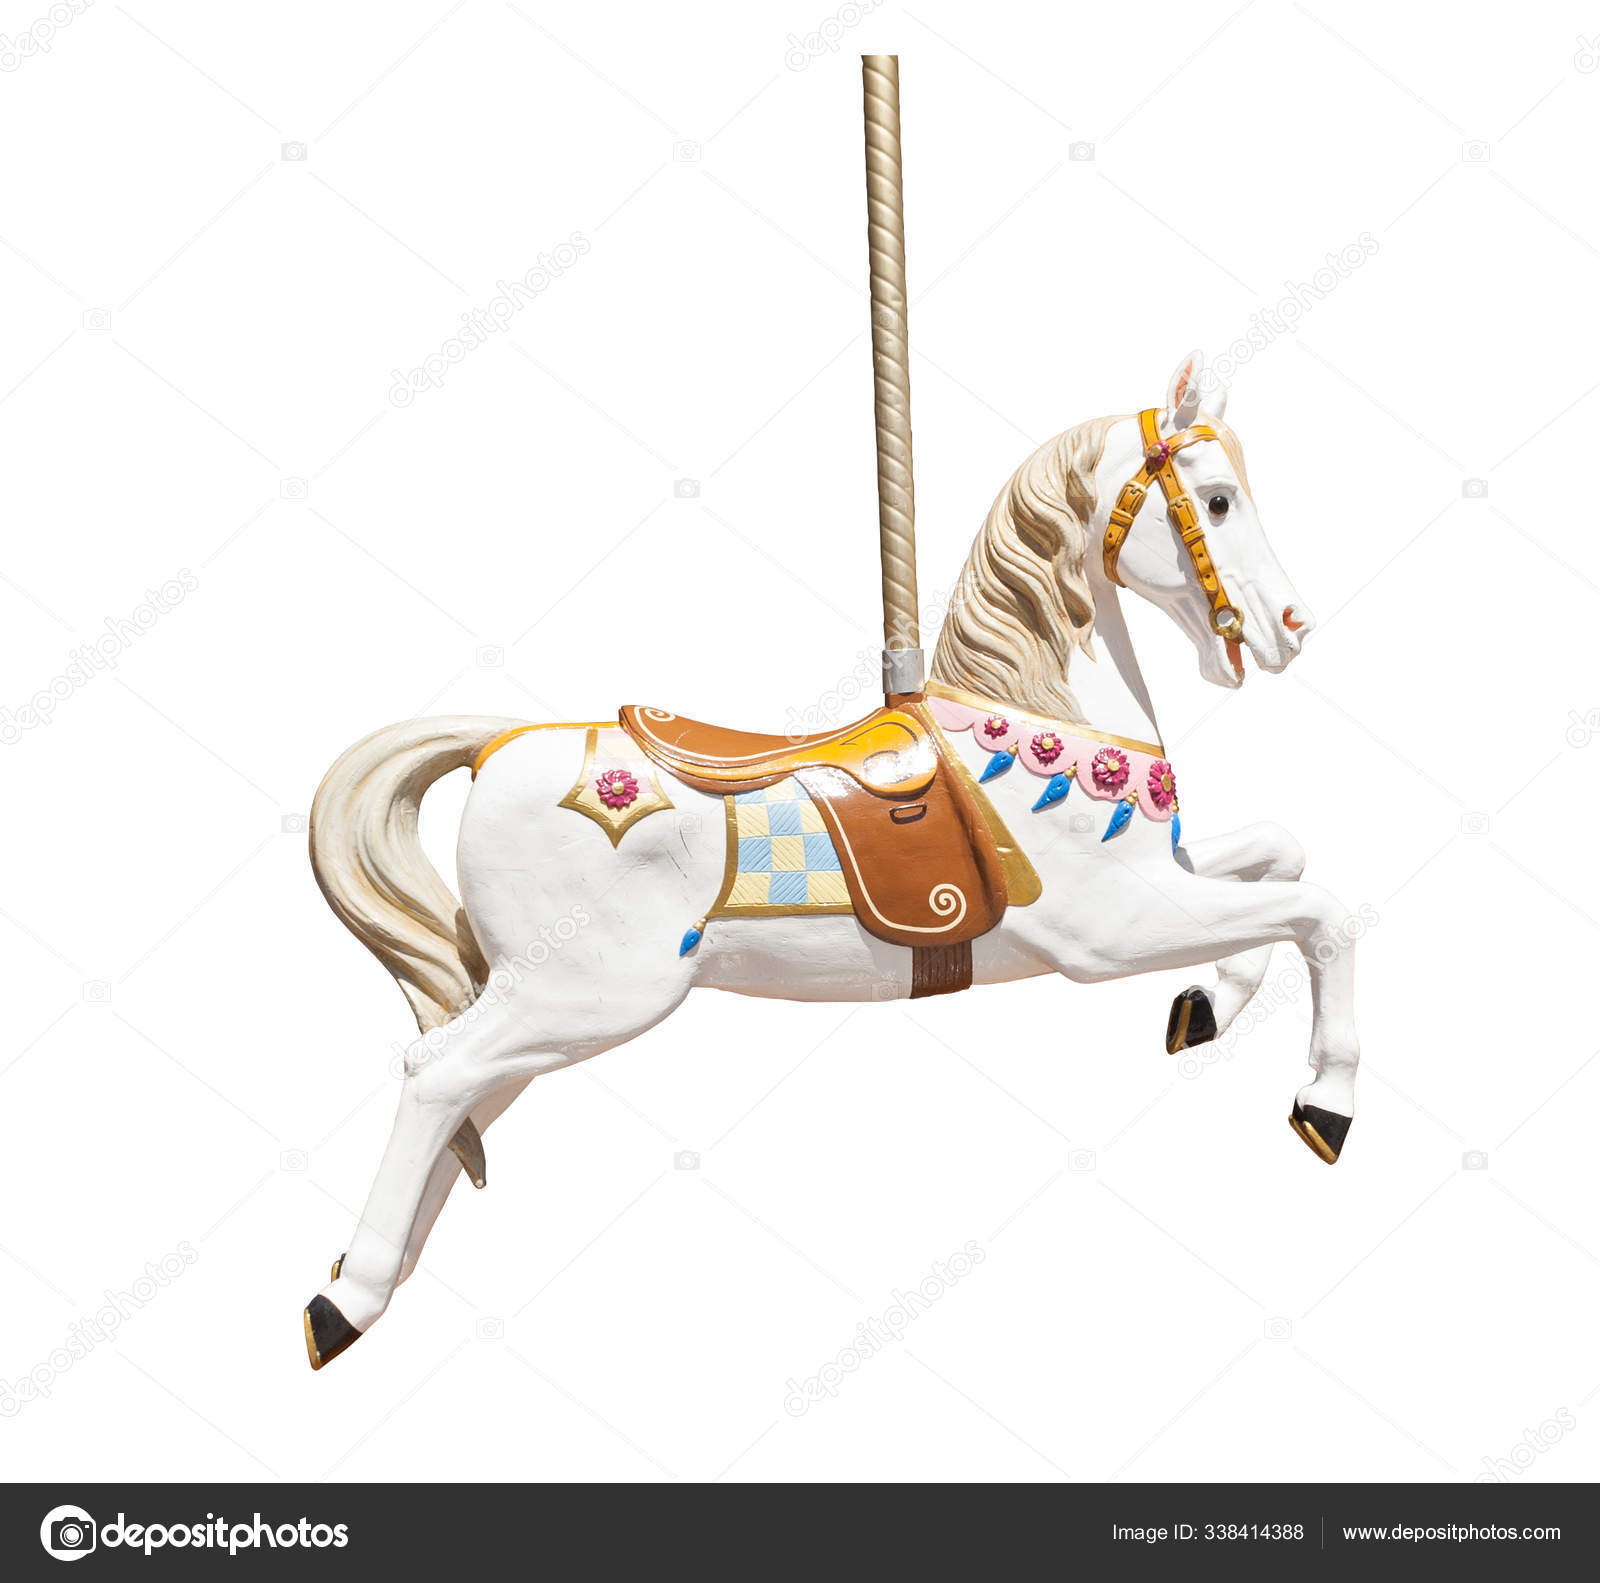 Adskillelse øge kok Old Wooden Carousel Horse Isolated White Background Stock Photo by  ©PantherMediaSeller 338414388